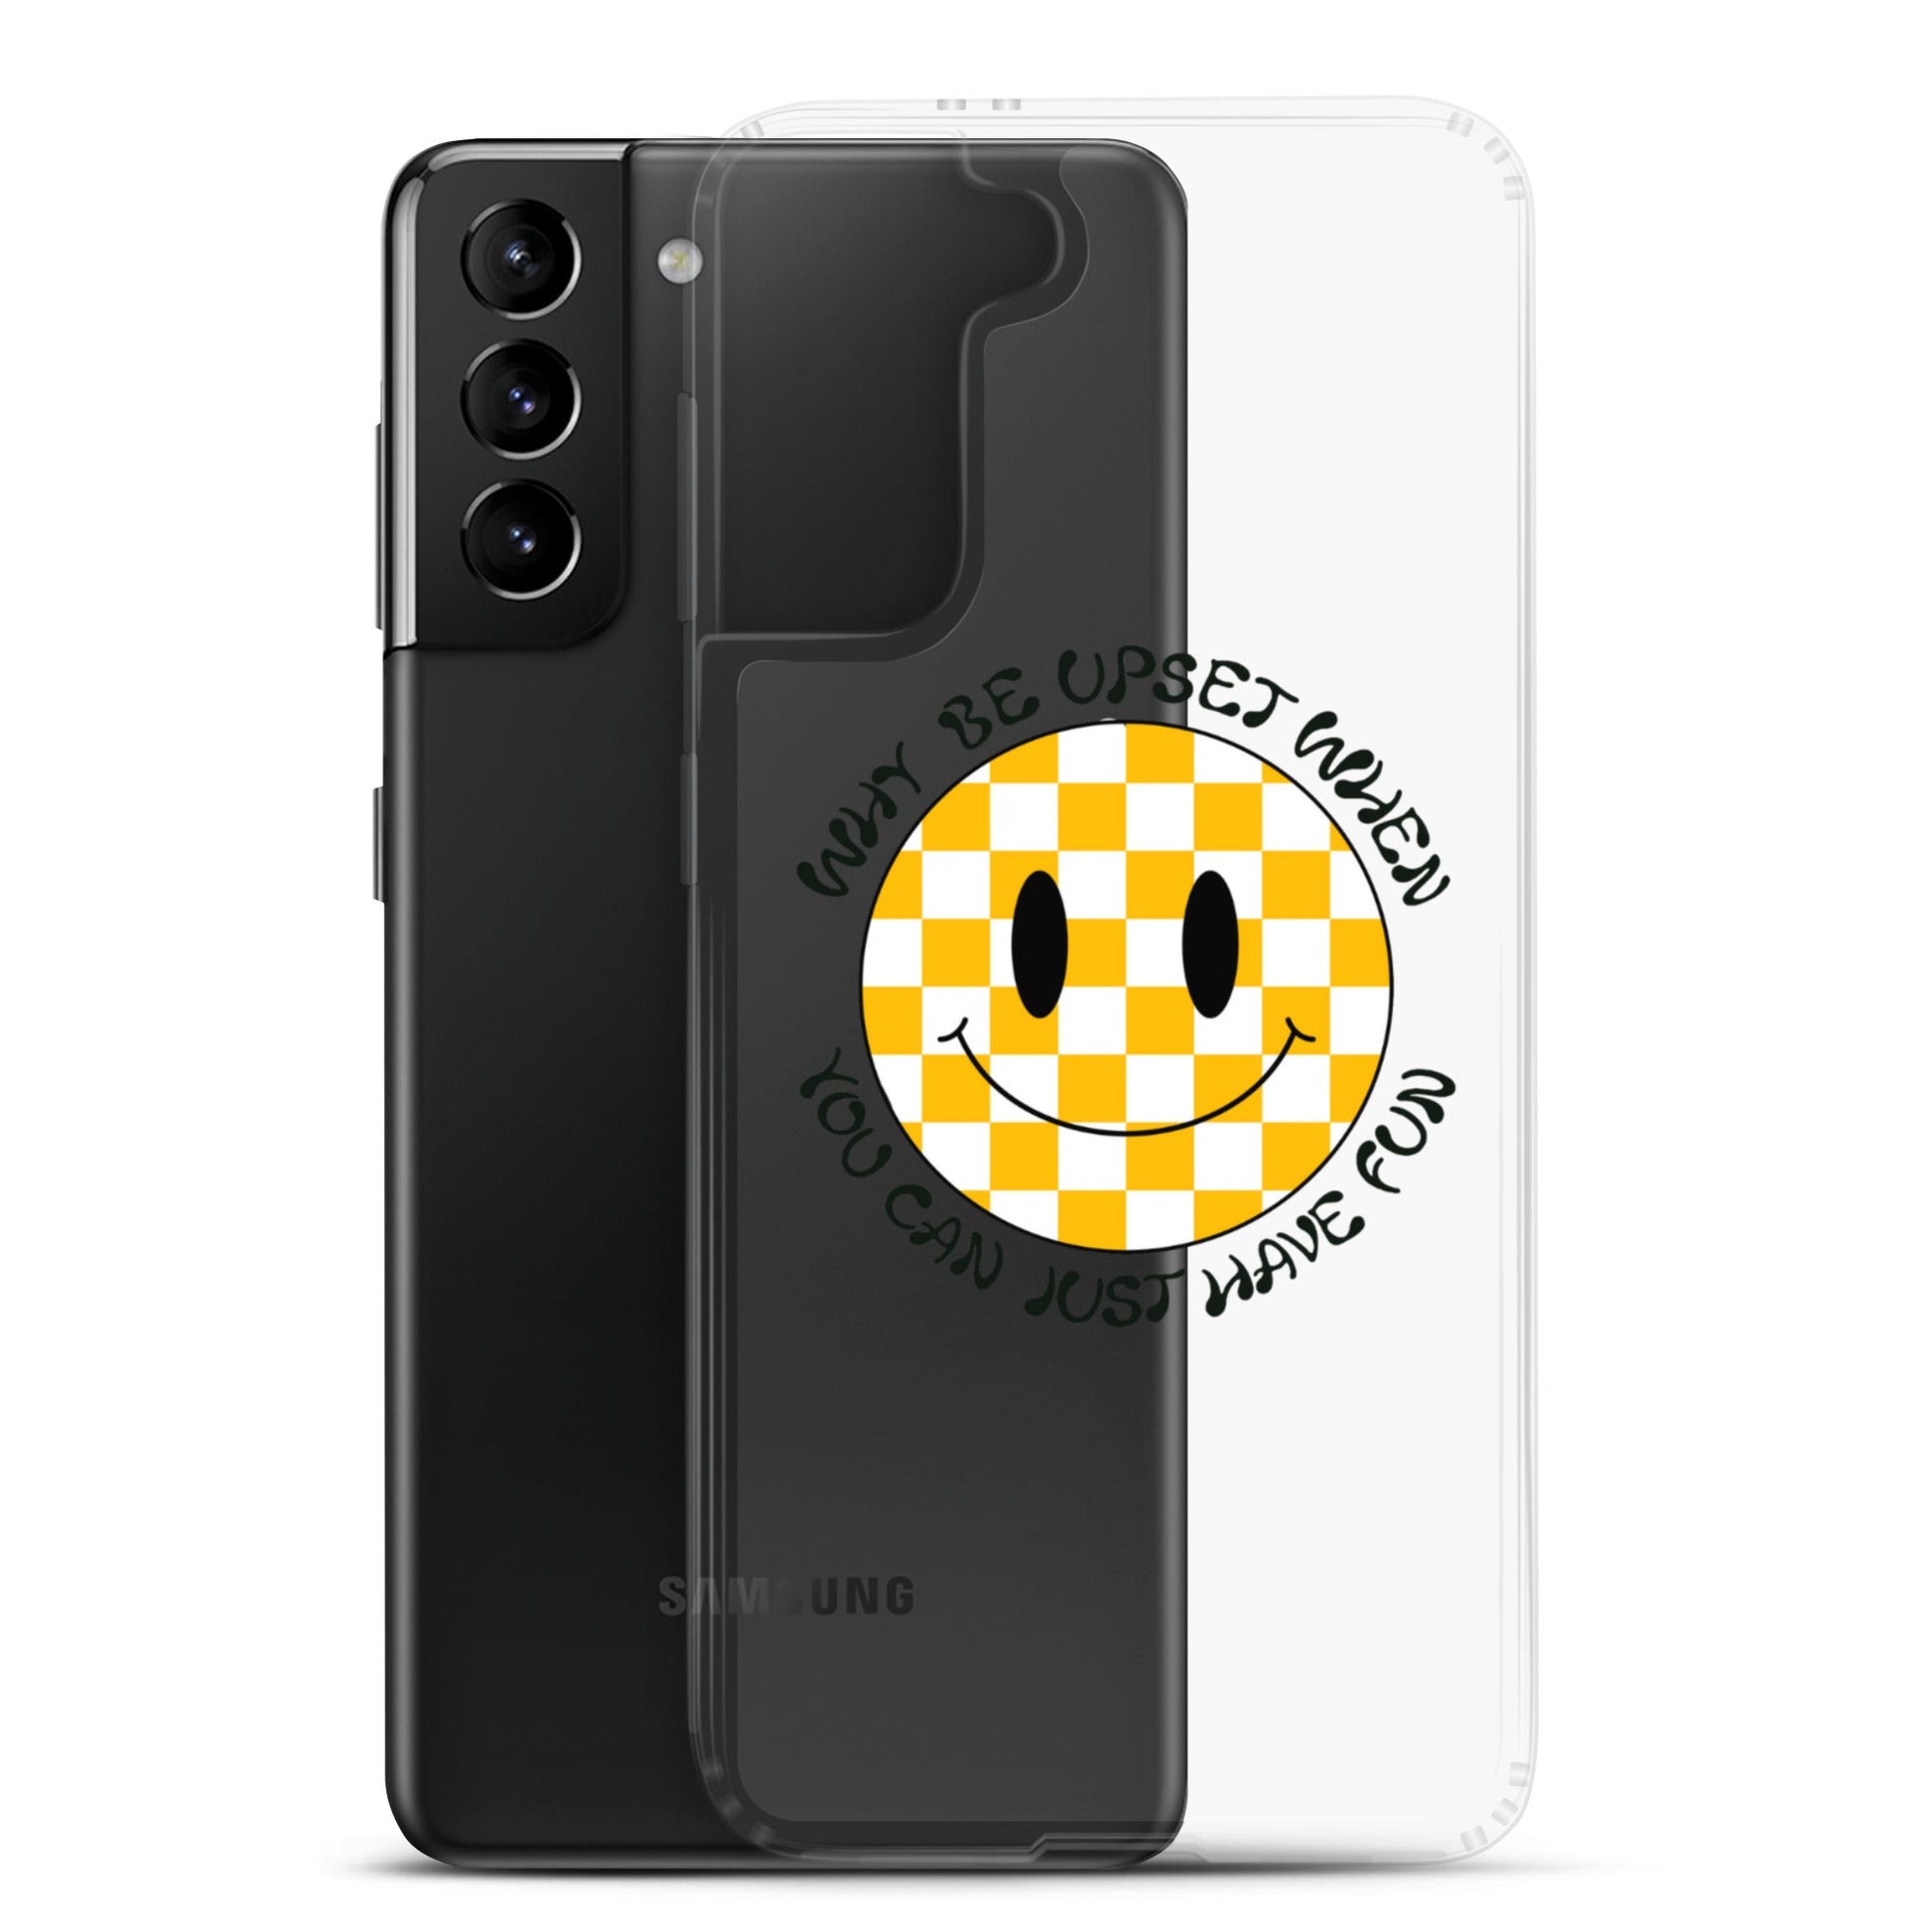 "Just Have Fun" Android Phone Case - twogirls1formula